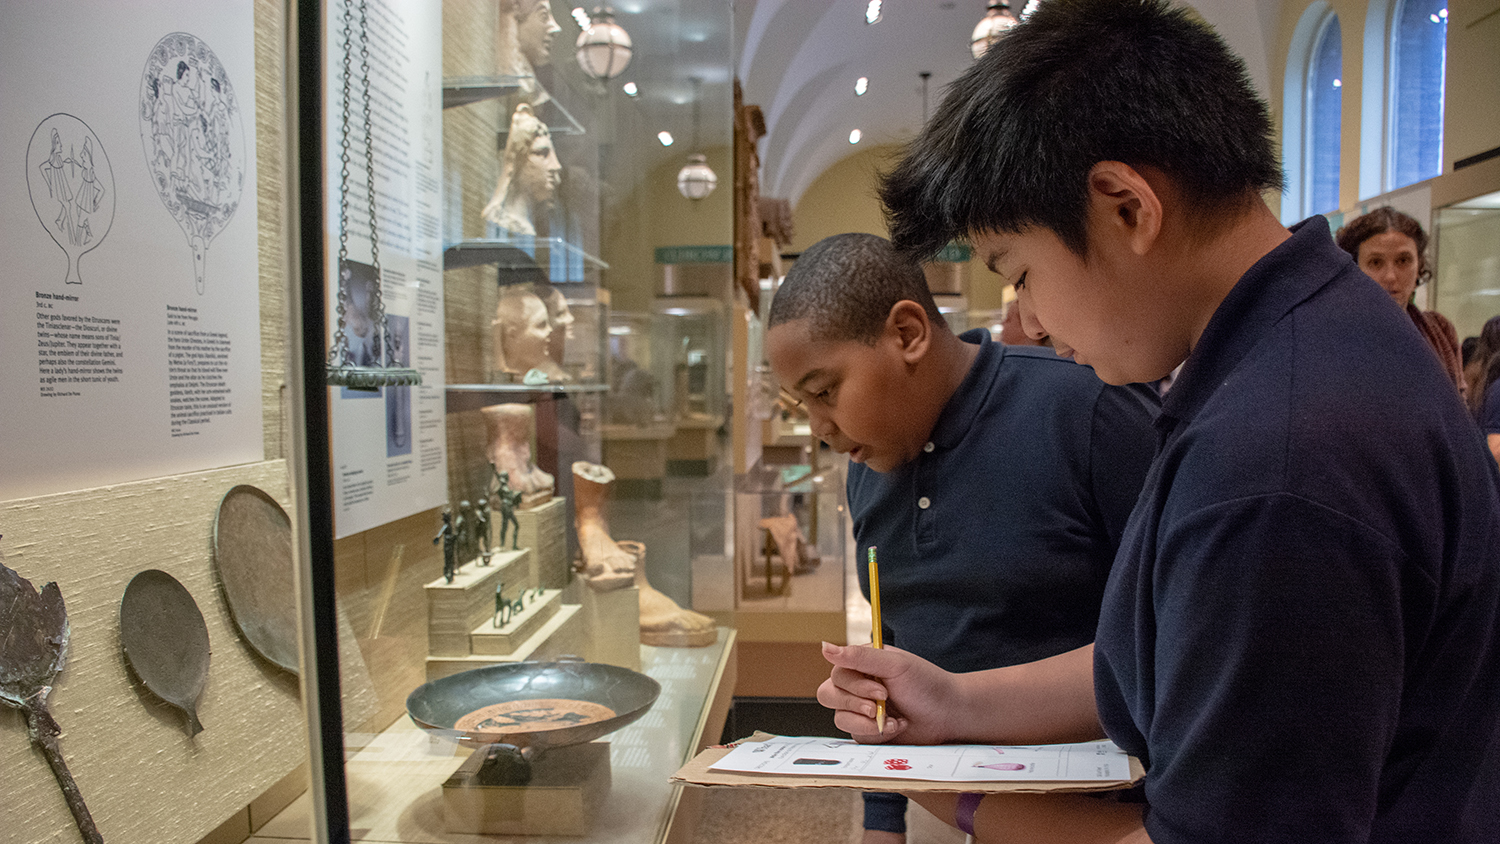 School children taking notes while on a museum tour.